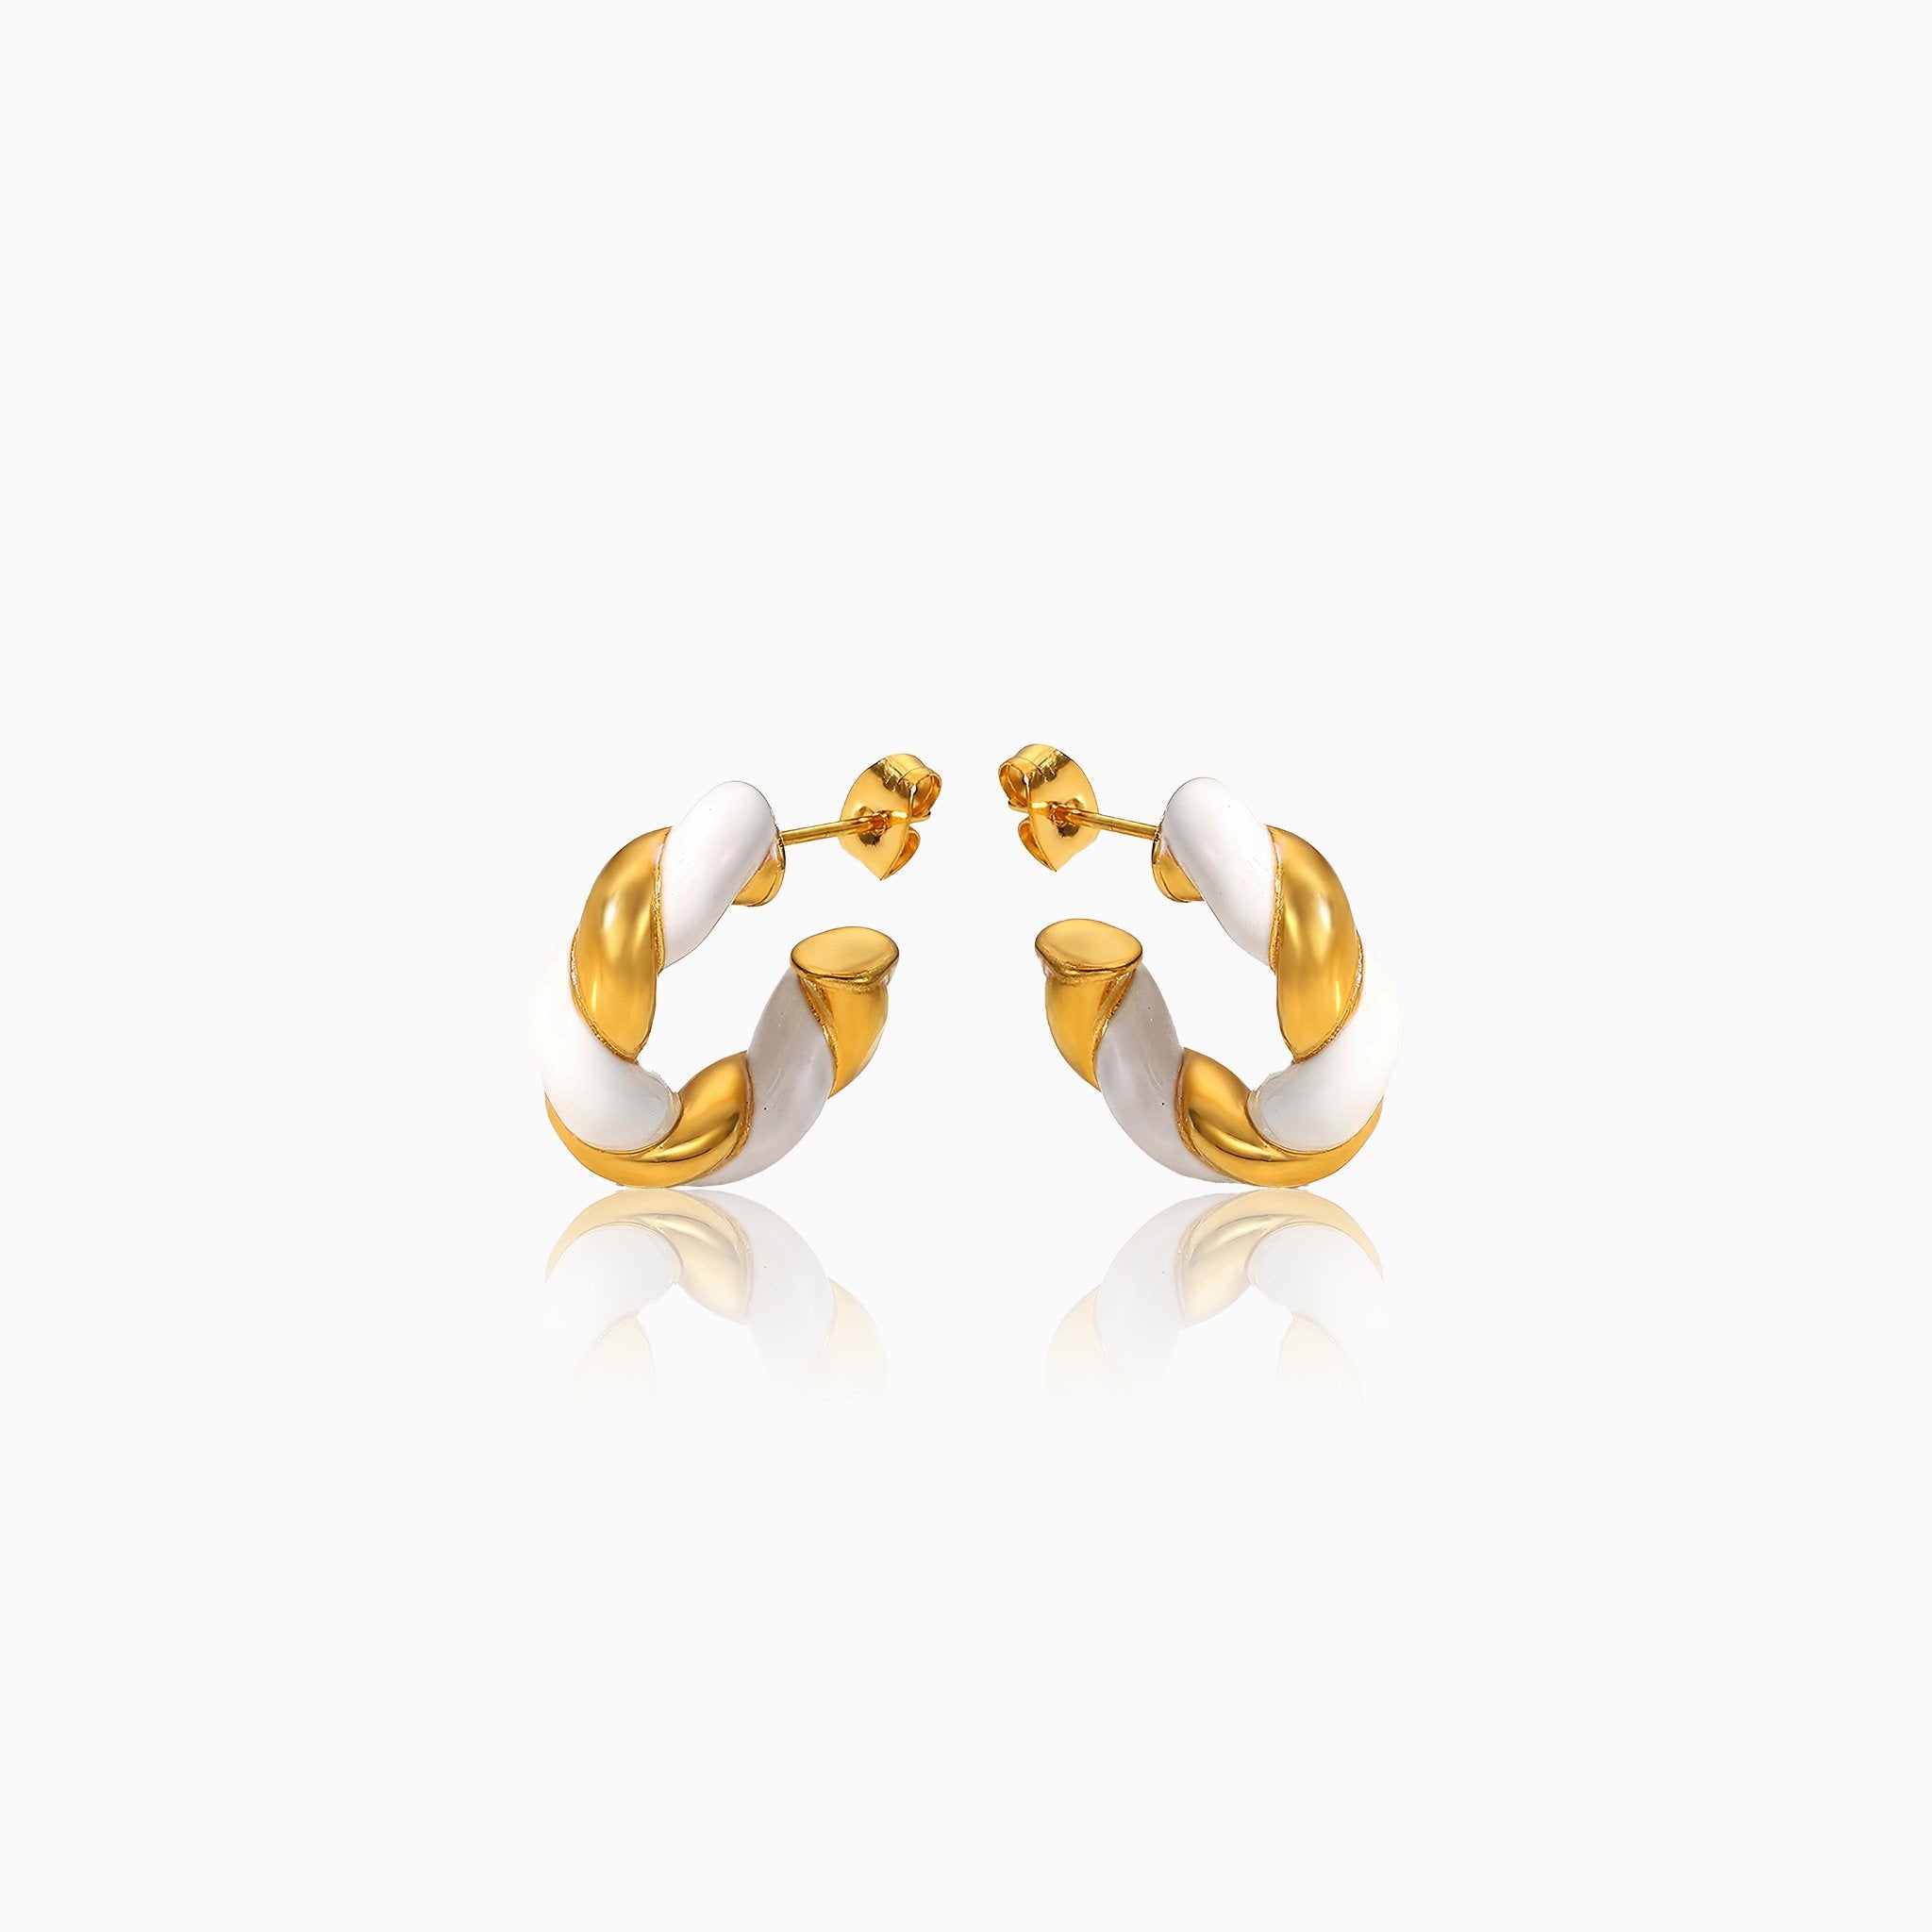 Twisted C Earrings - Nobbier - Earrings - 18K Gold And Titanium PVD Coated Jewelry